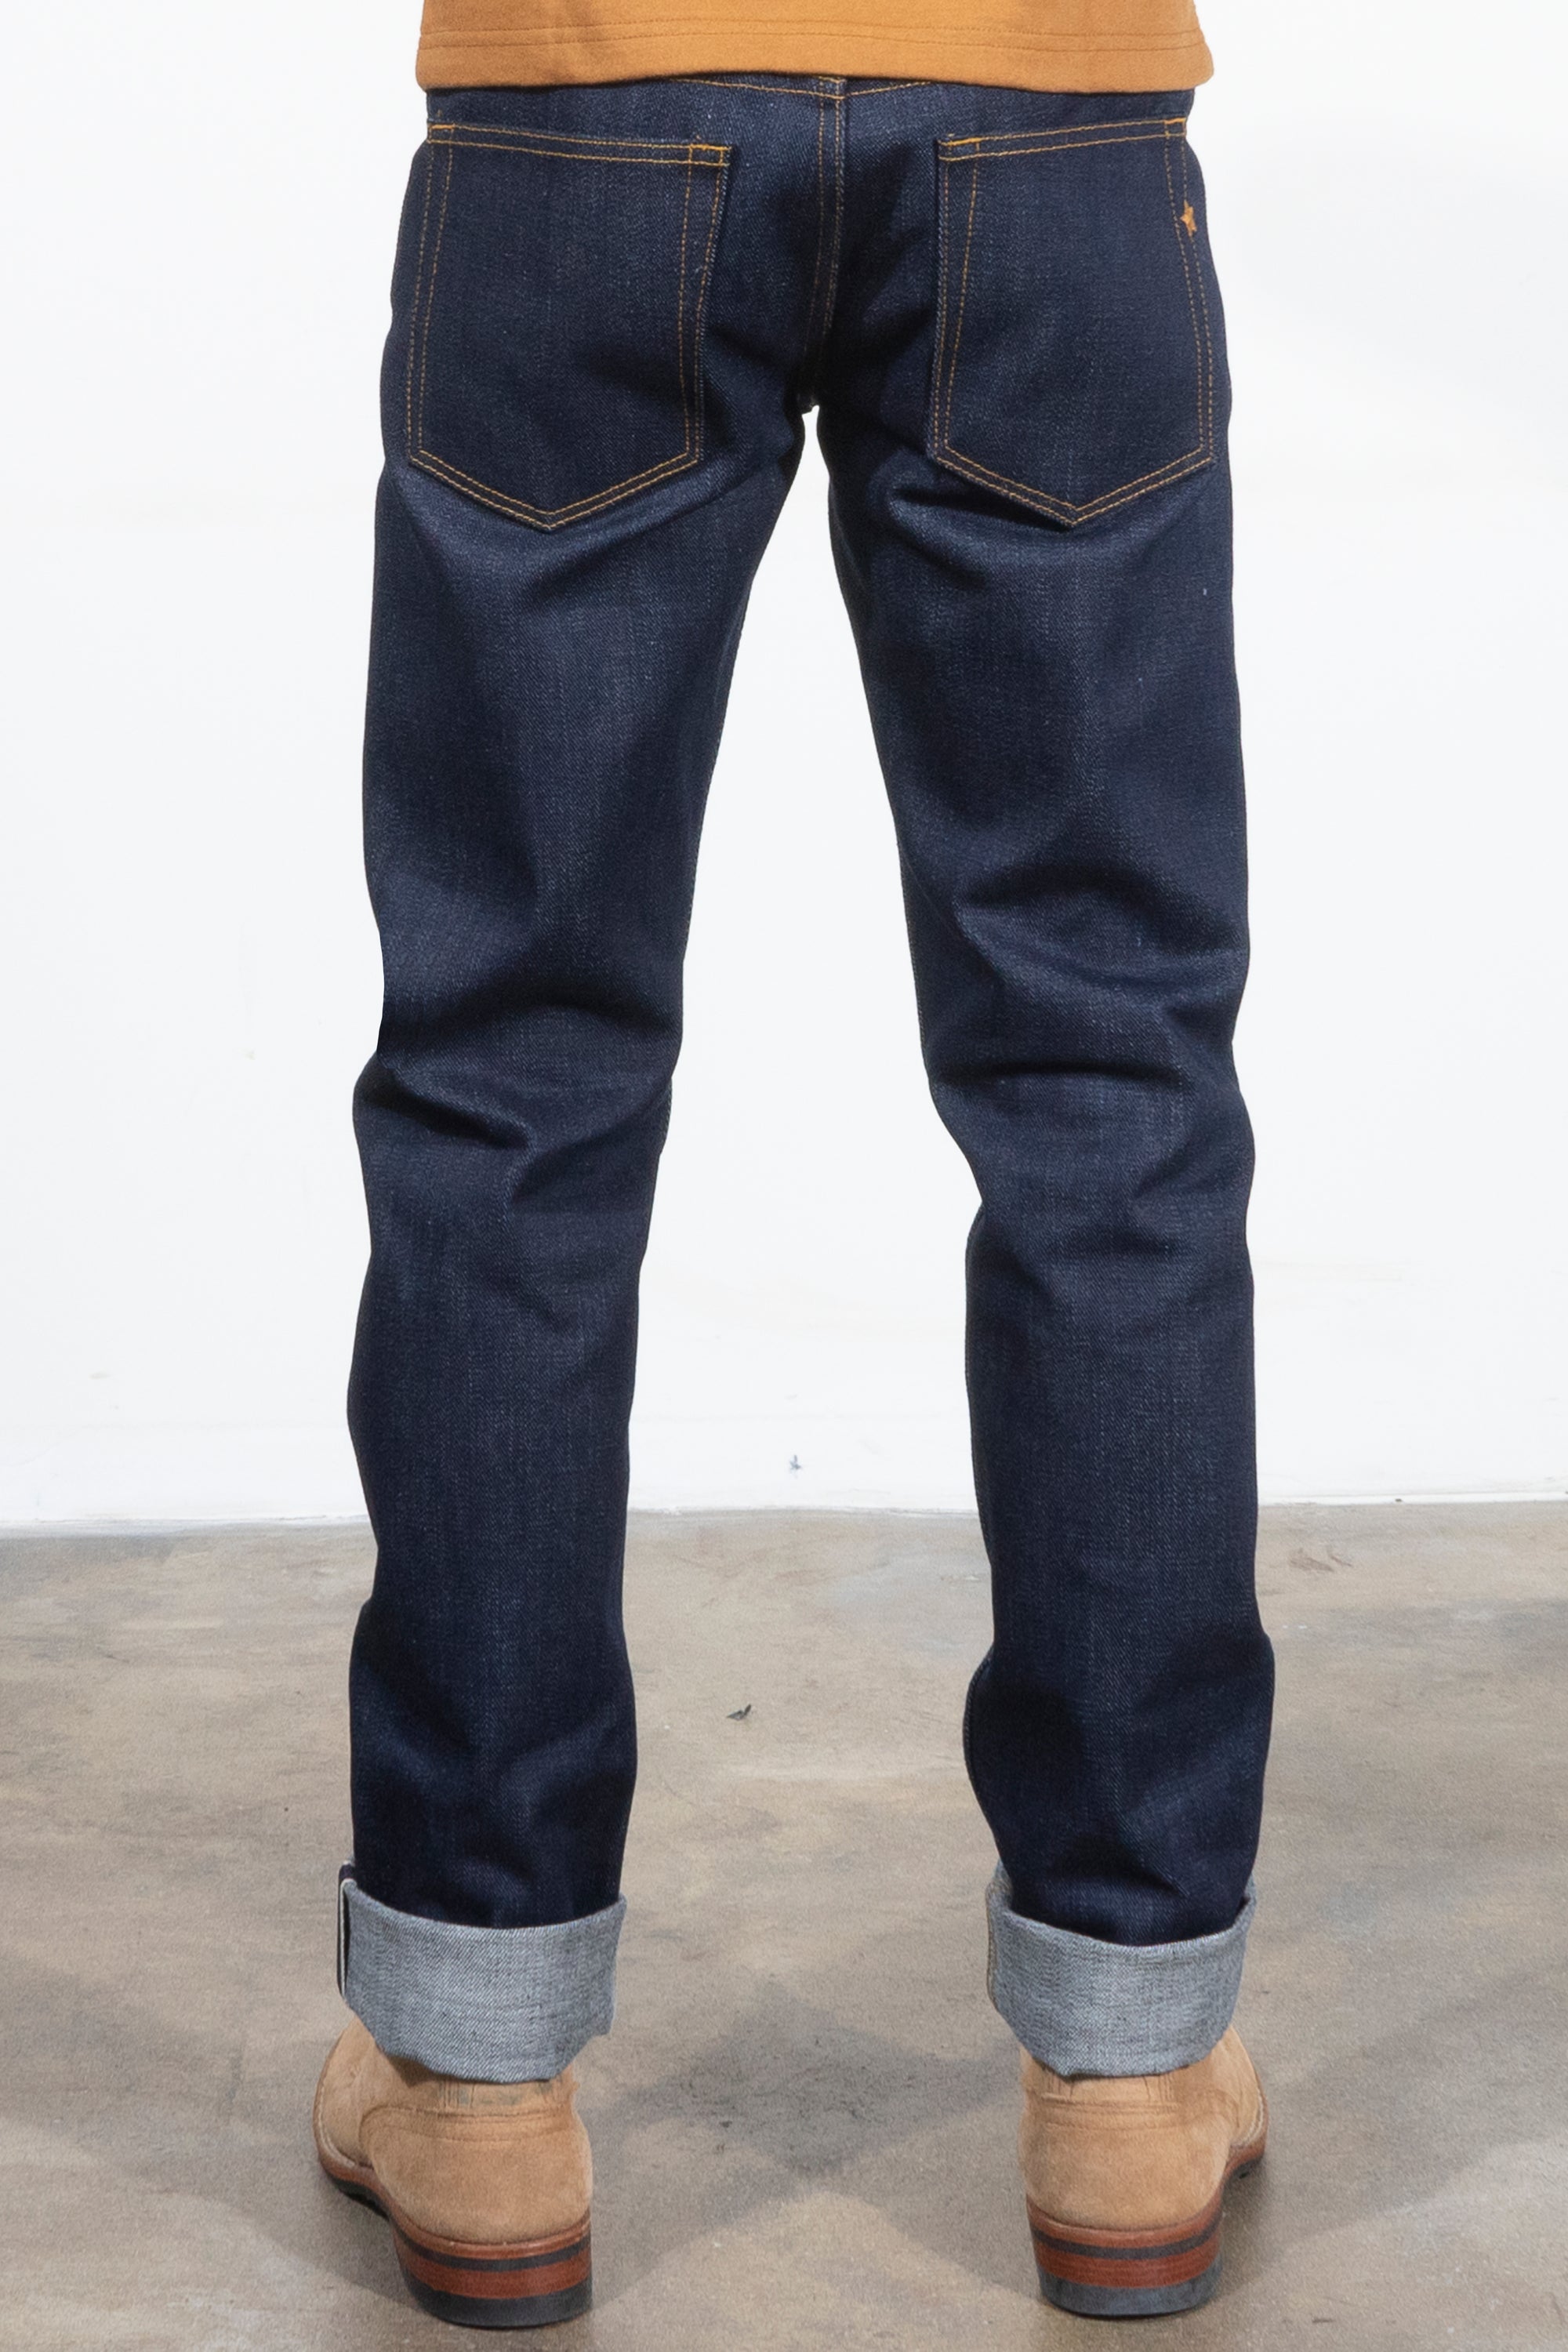 The Scout - Womens Hi Rise Taper Selvage Denim Jean - Brave Star Selvage